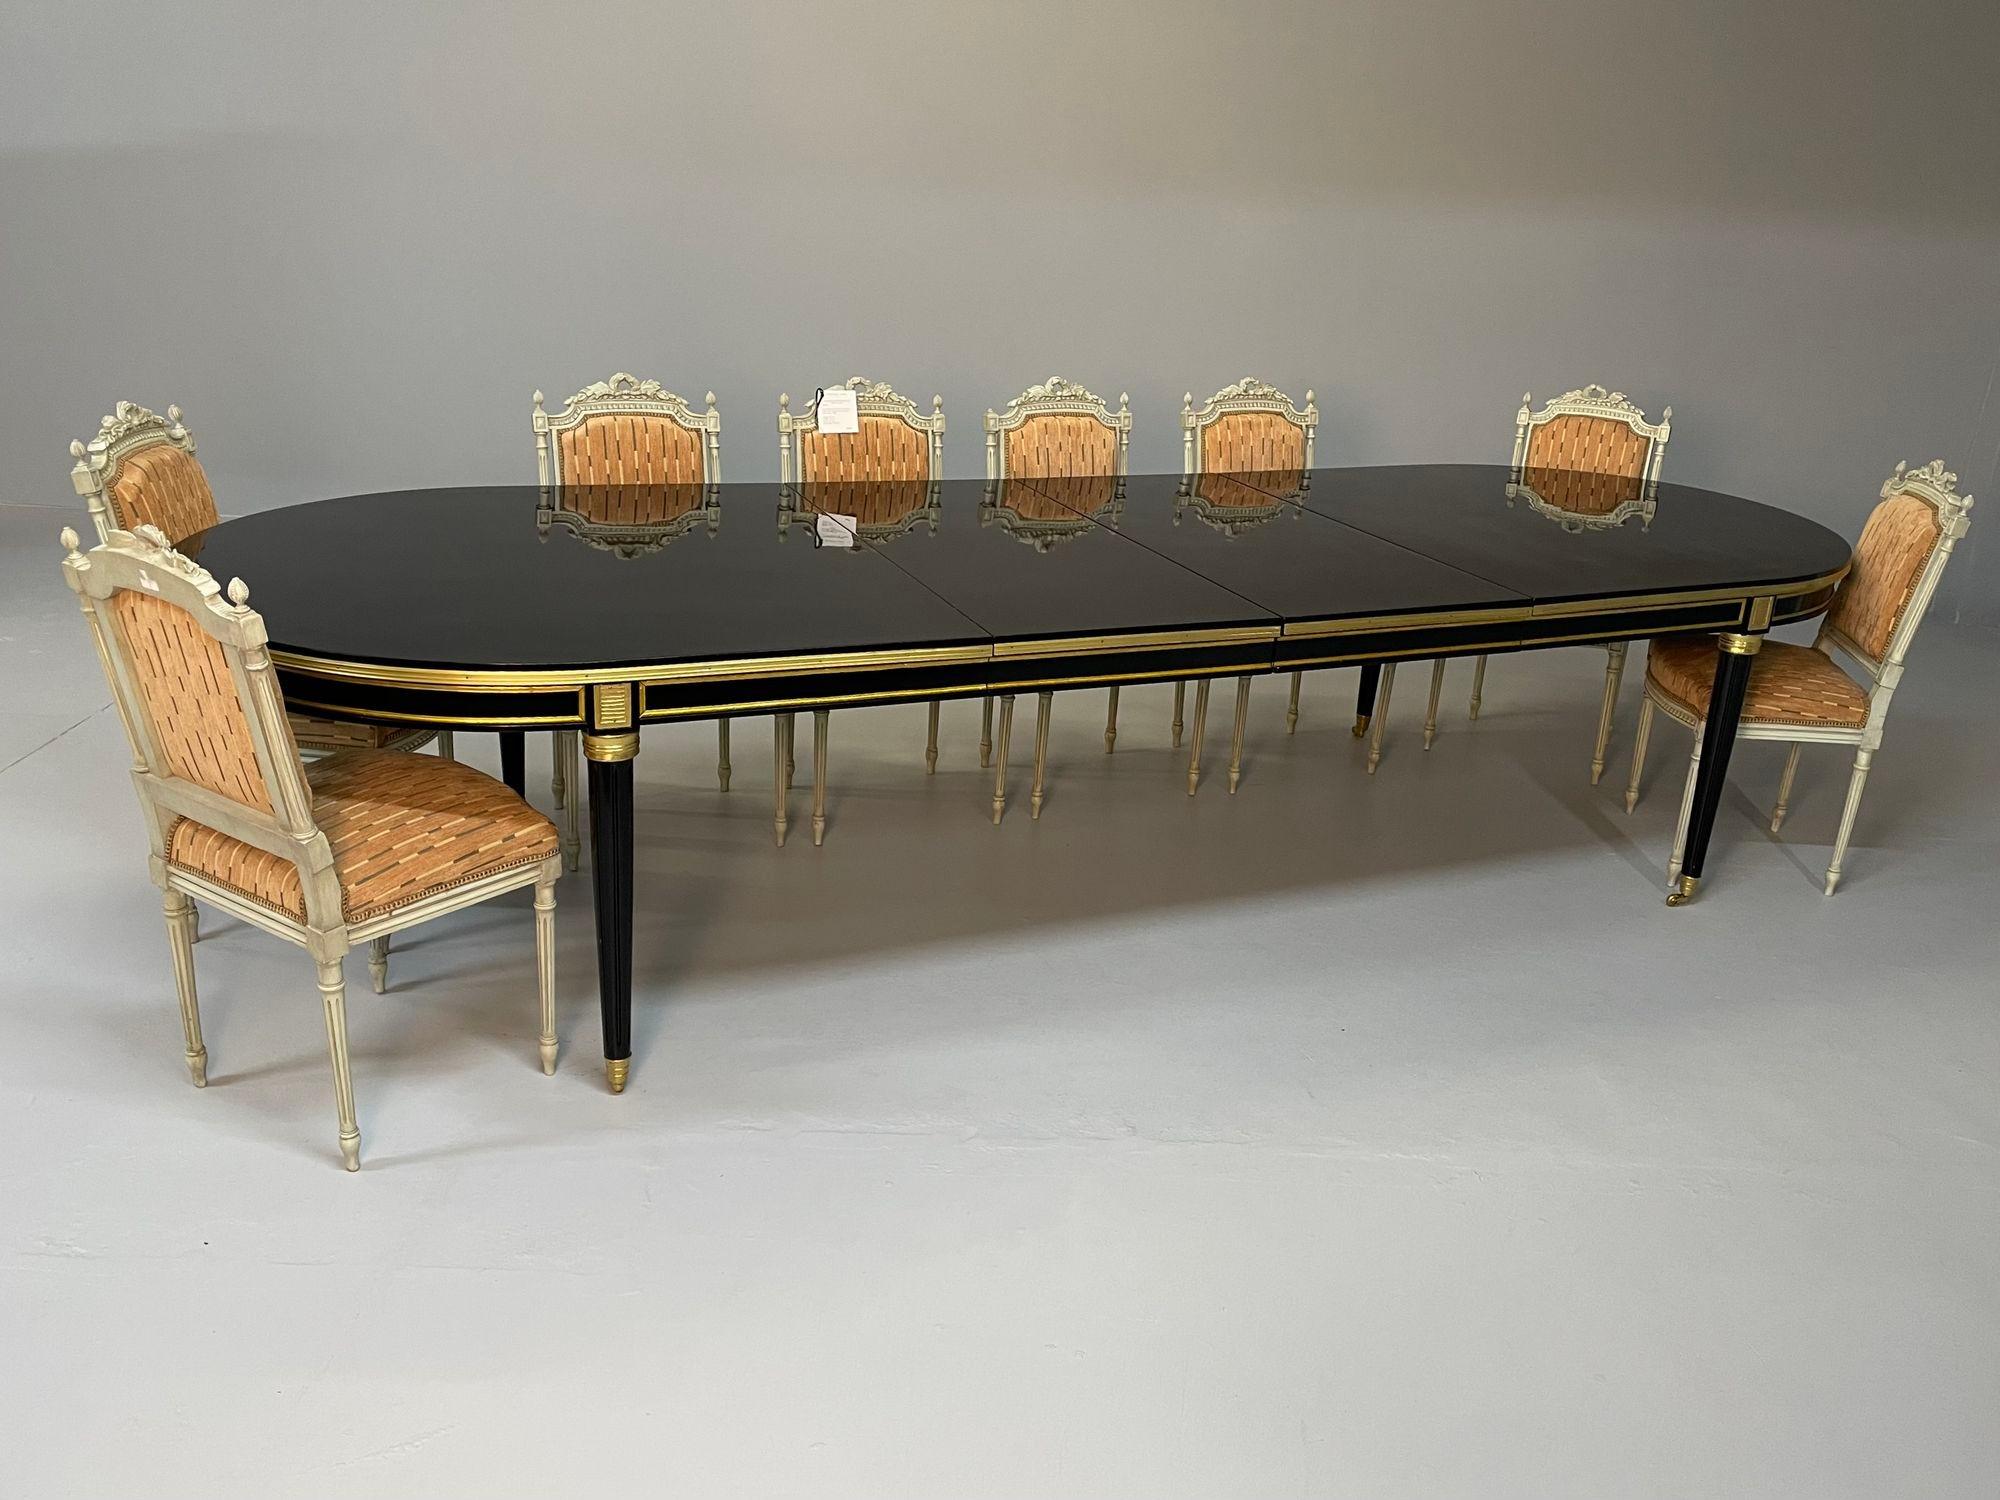 A Louis XVI Style Dining, Conference Table in the Fashion of Maison Jansen, Up to 15 feet fully extended

A Monumental ebony and bronze mounted dining table extending to 15 feet six inches long with all four 22 inch leaves inserted. Having four